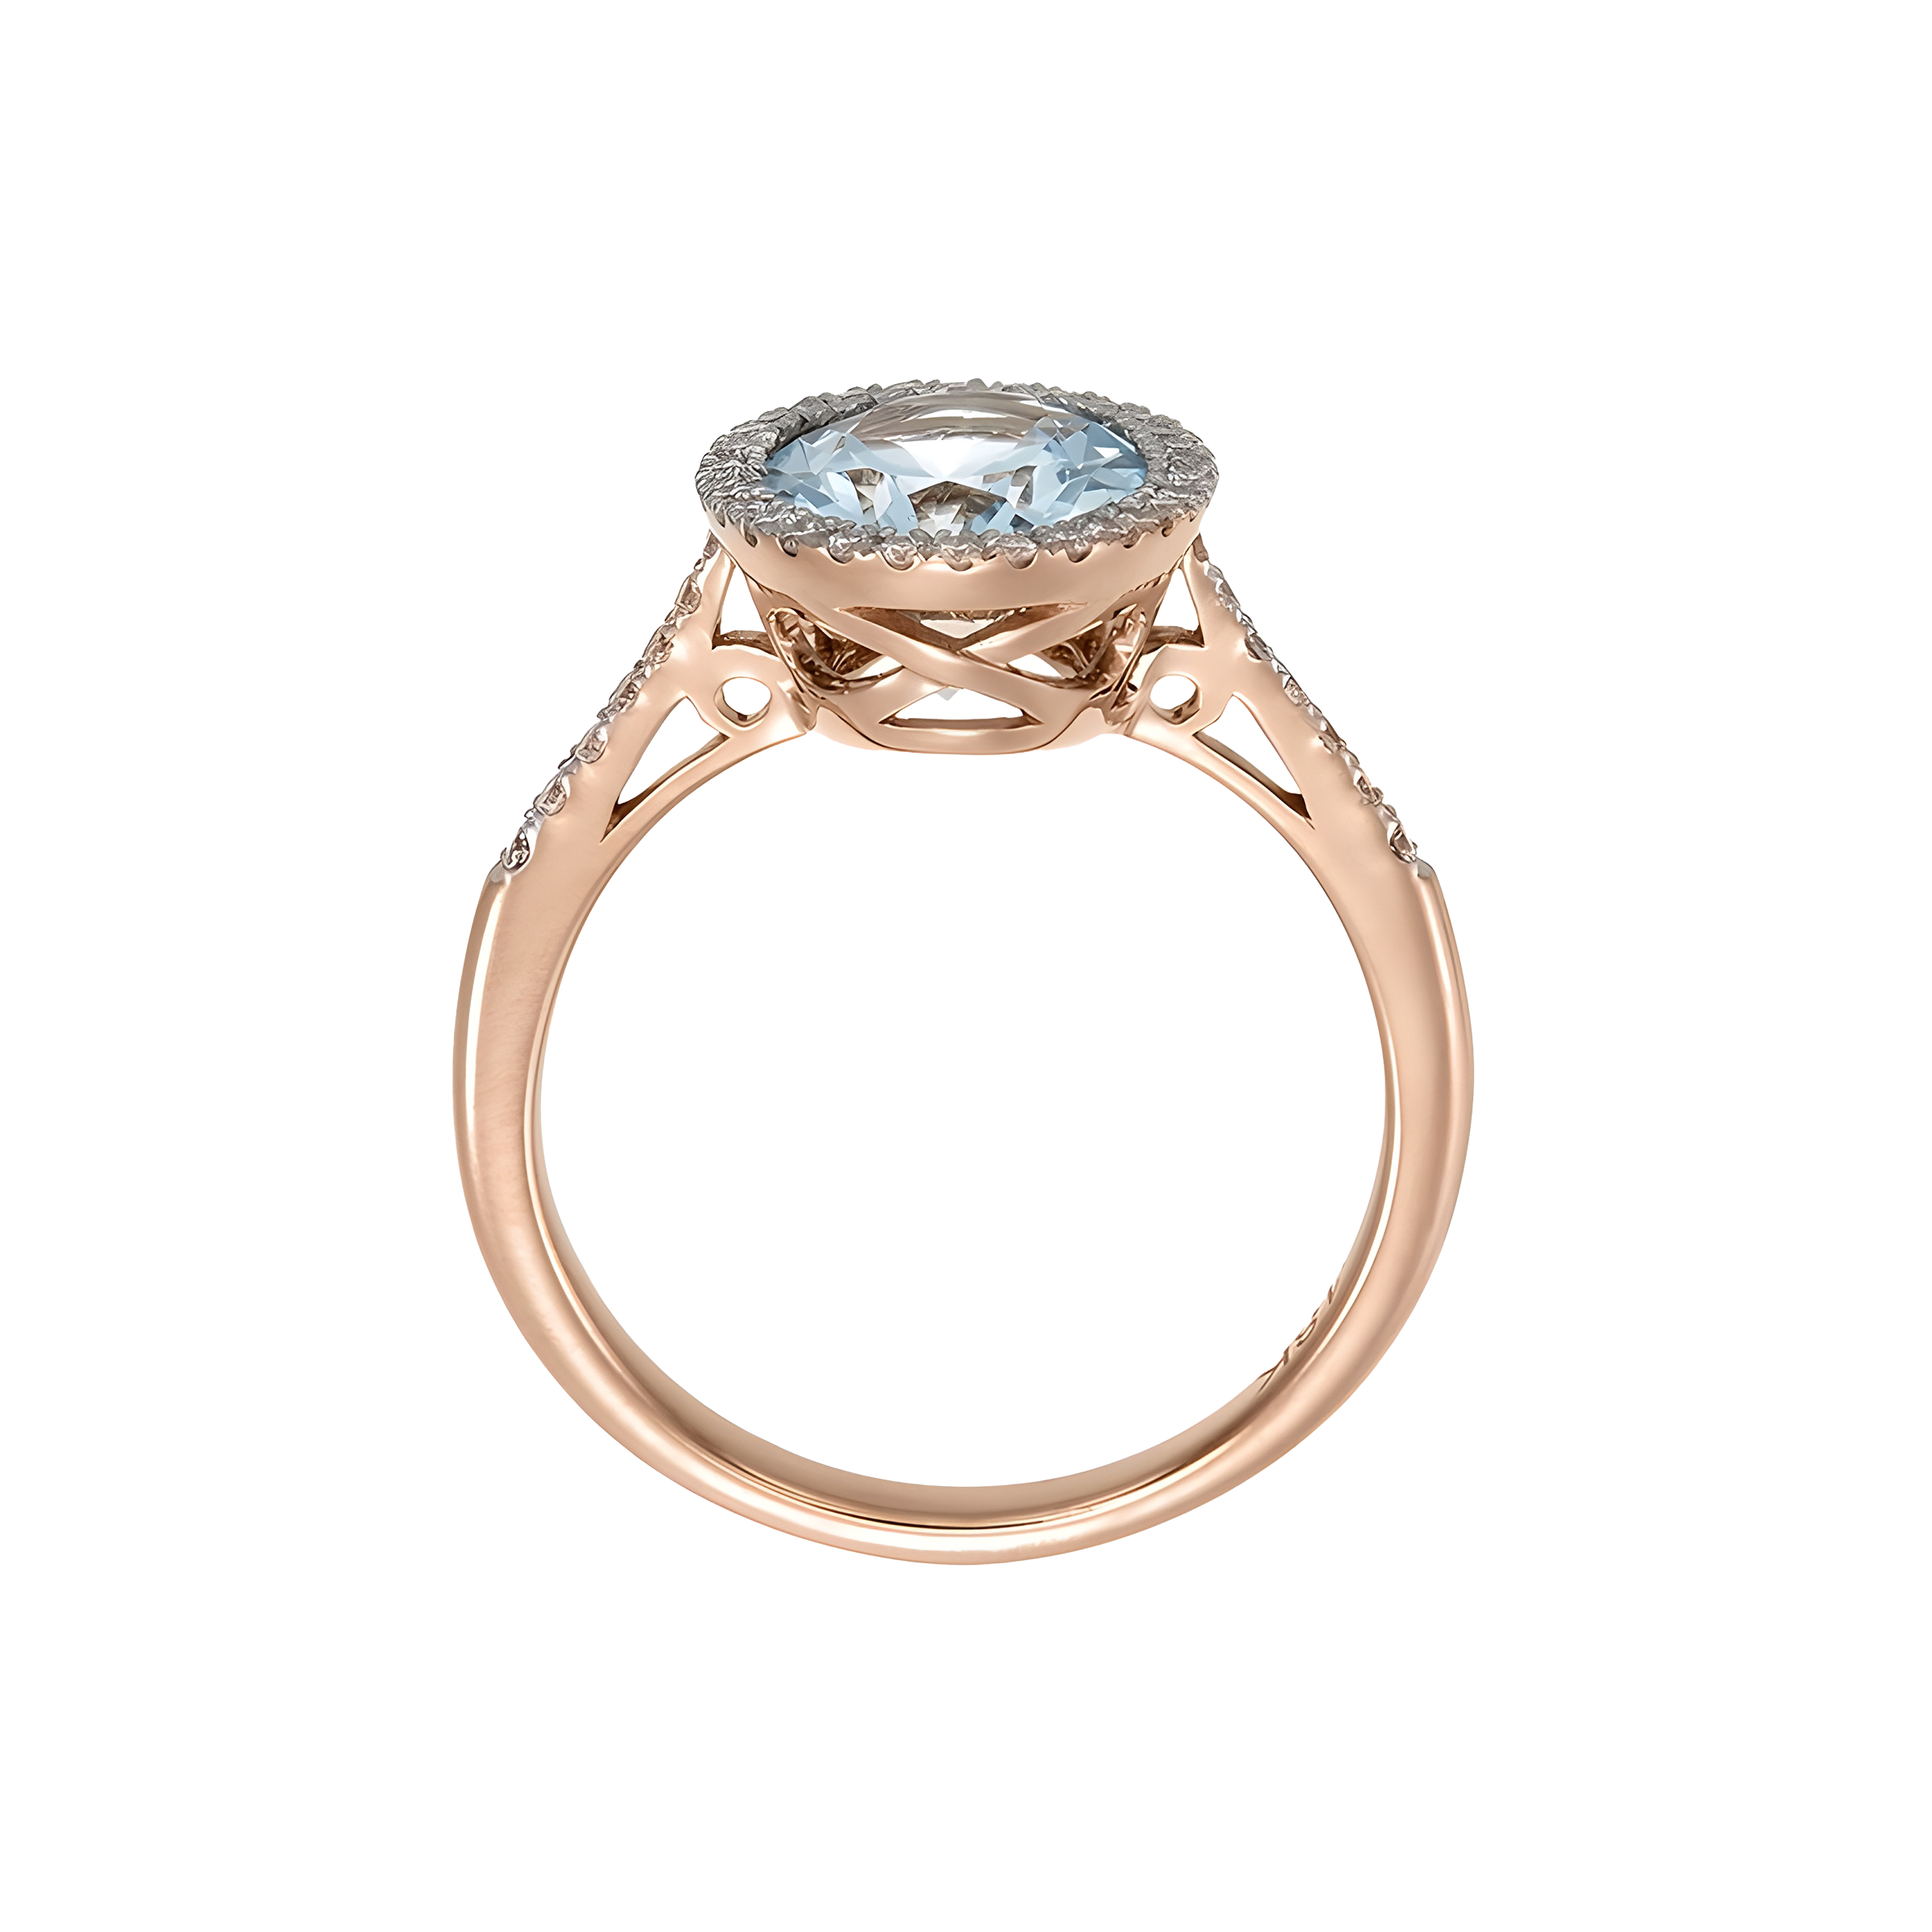 Oval Aquamarine and Diamond Halo Ring in 18k Rose Gold